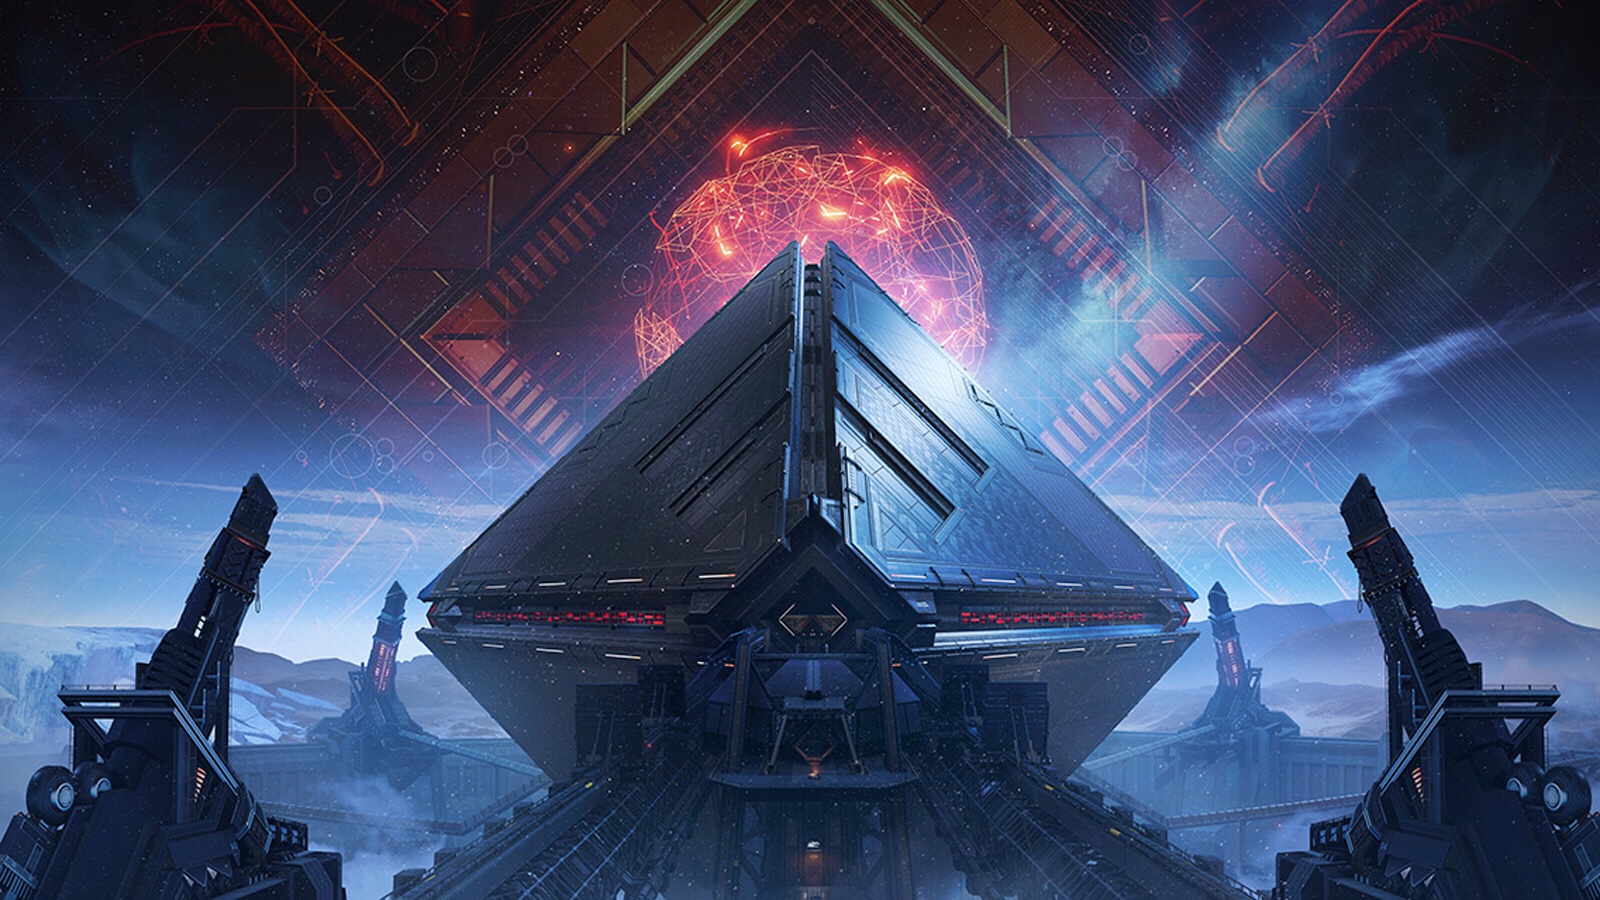 Next ‘Destiny 2’ expansion, ‘Warmind,’ due to come out on May 8th